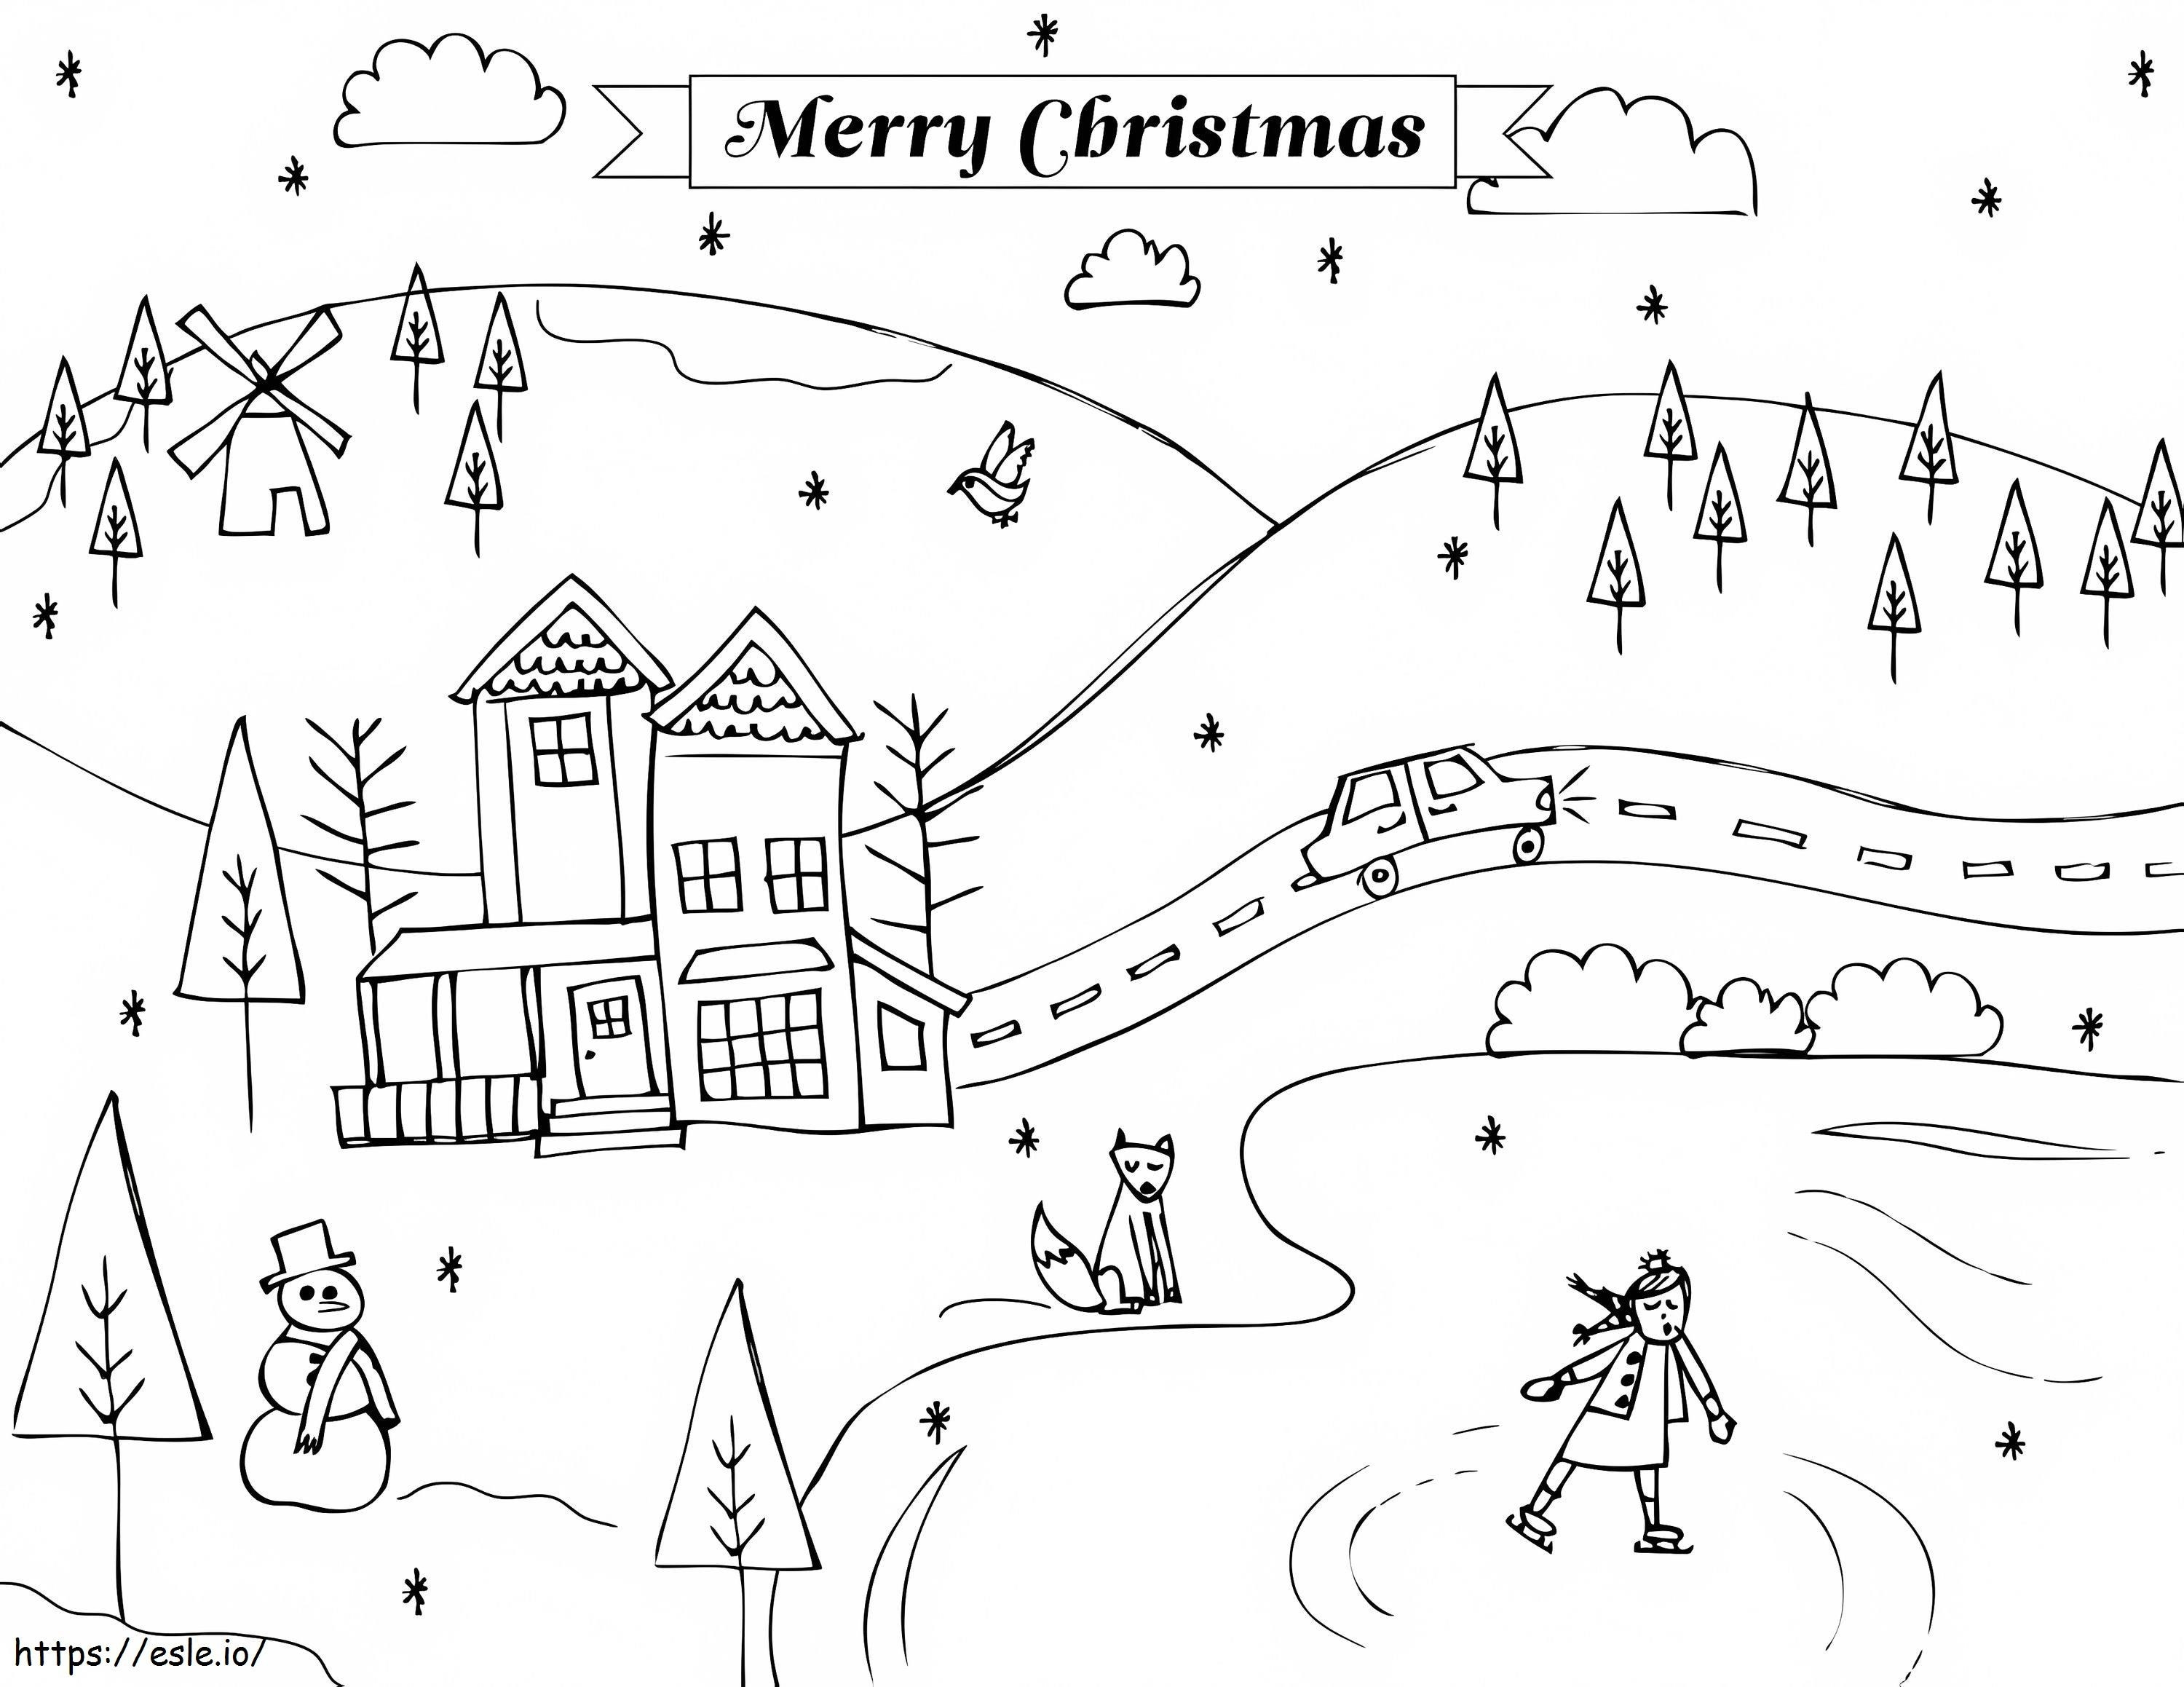 Simple Winter Scene coloring page